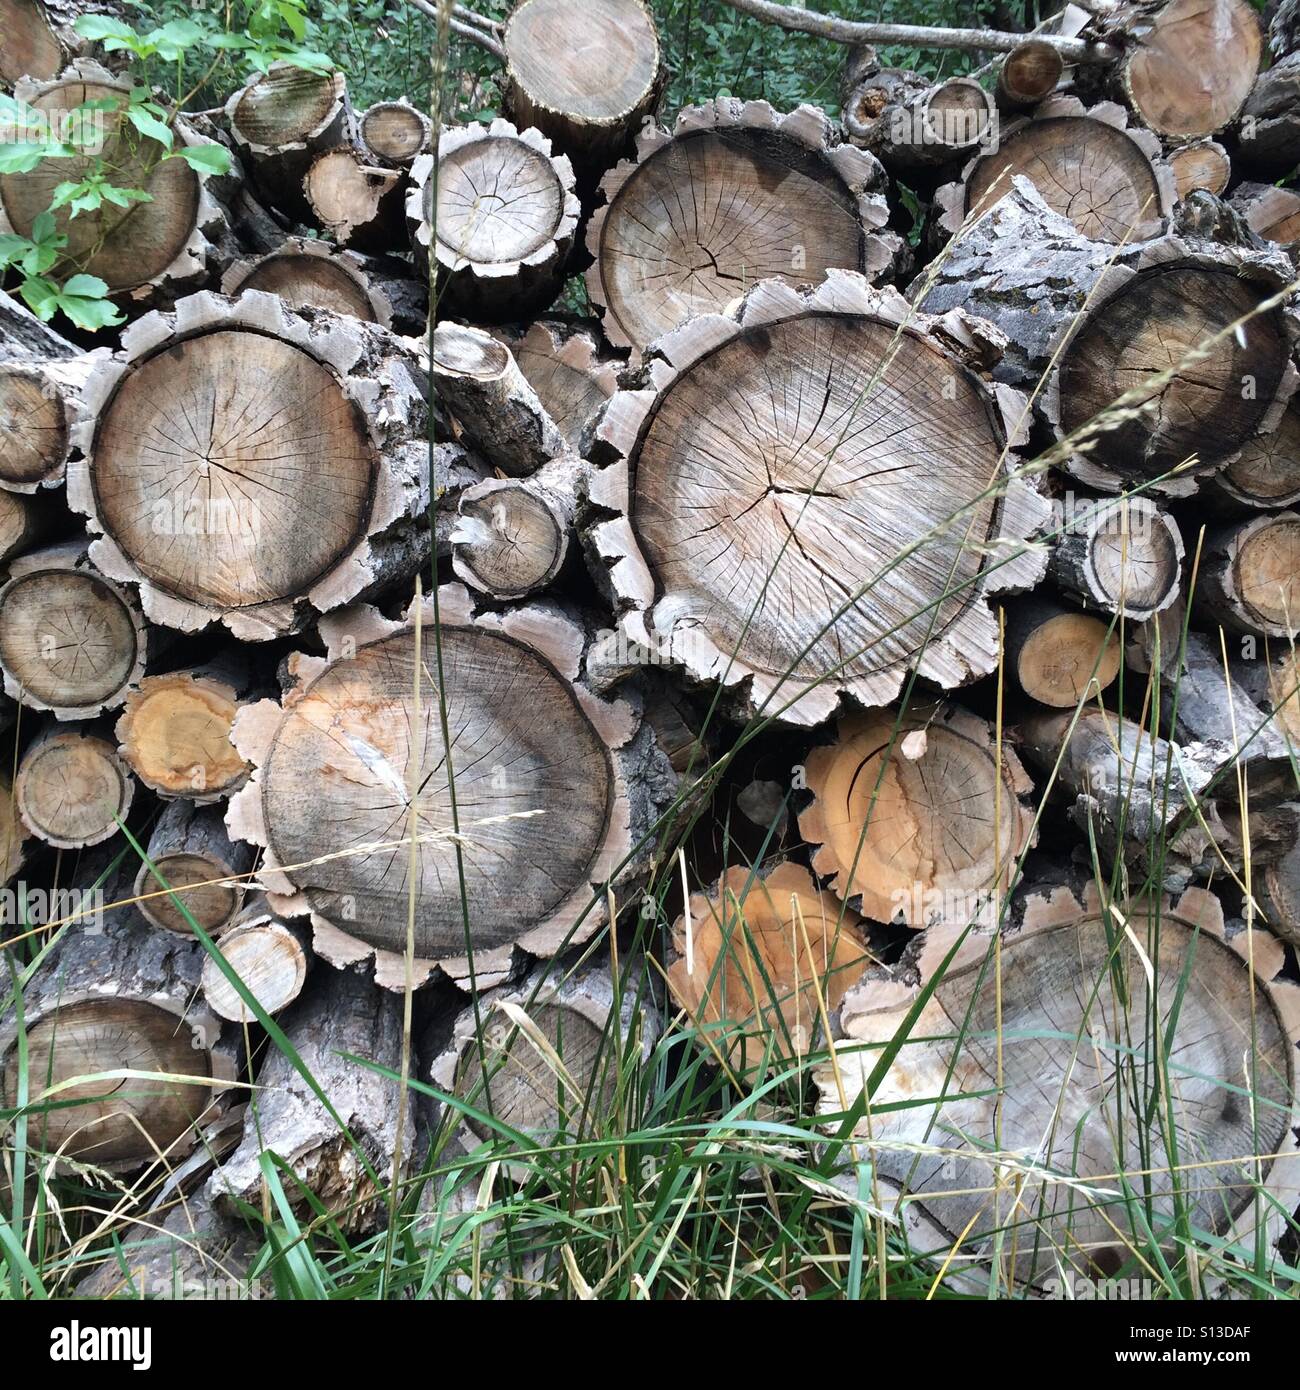 Cross section of a wood pile. Stock Photo